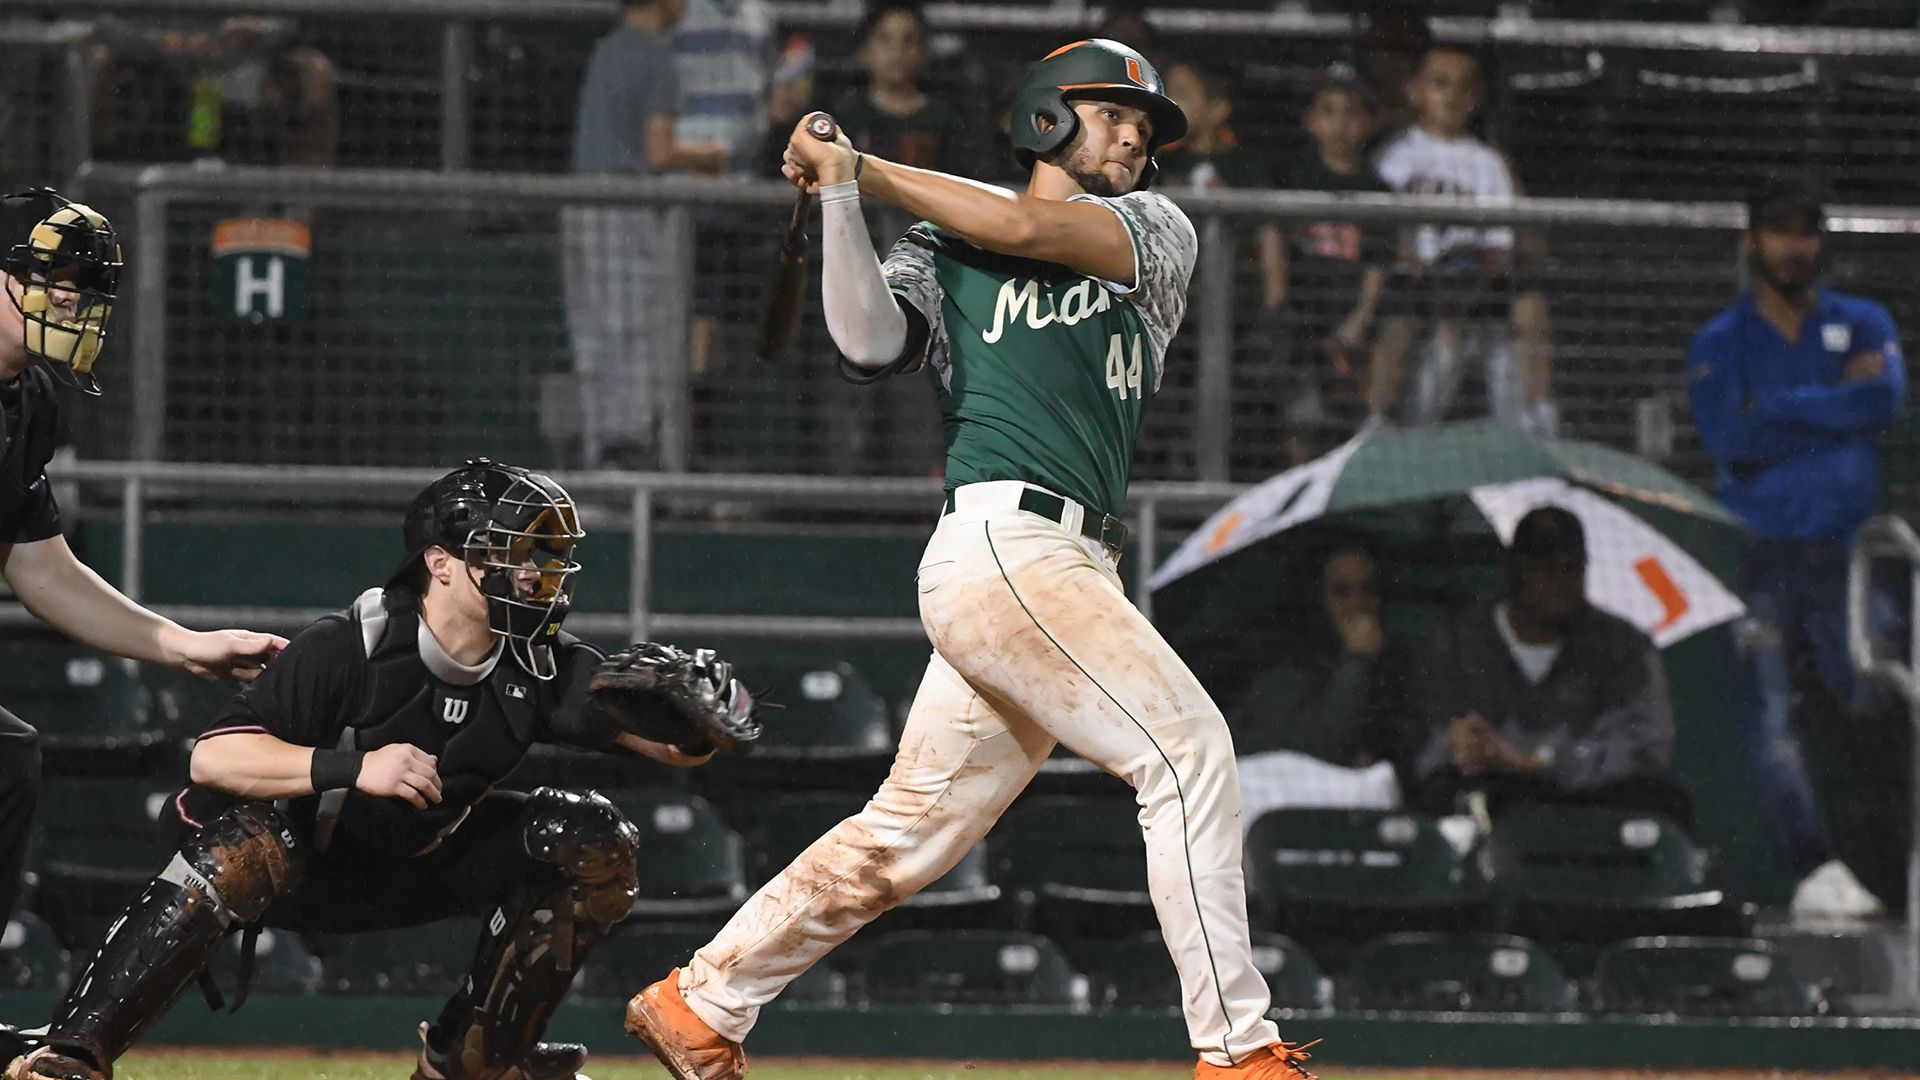 Canes Smash Four Homers in 8-2 Win Over Rutgers